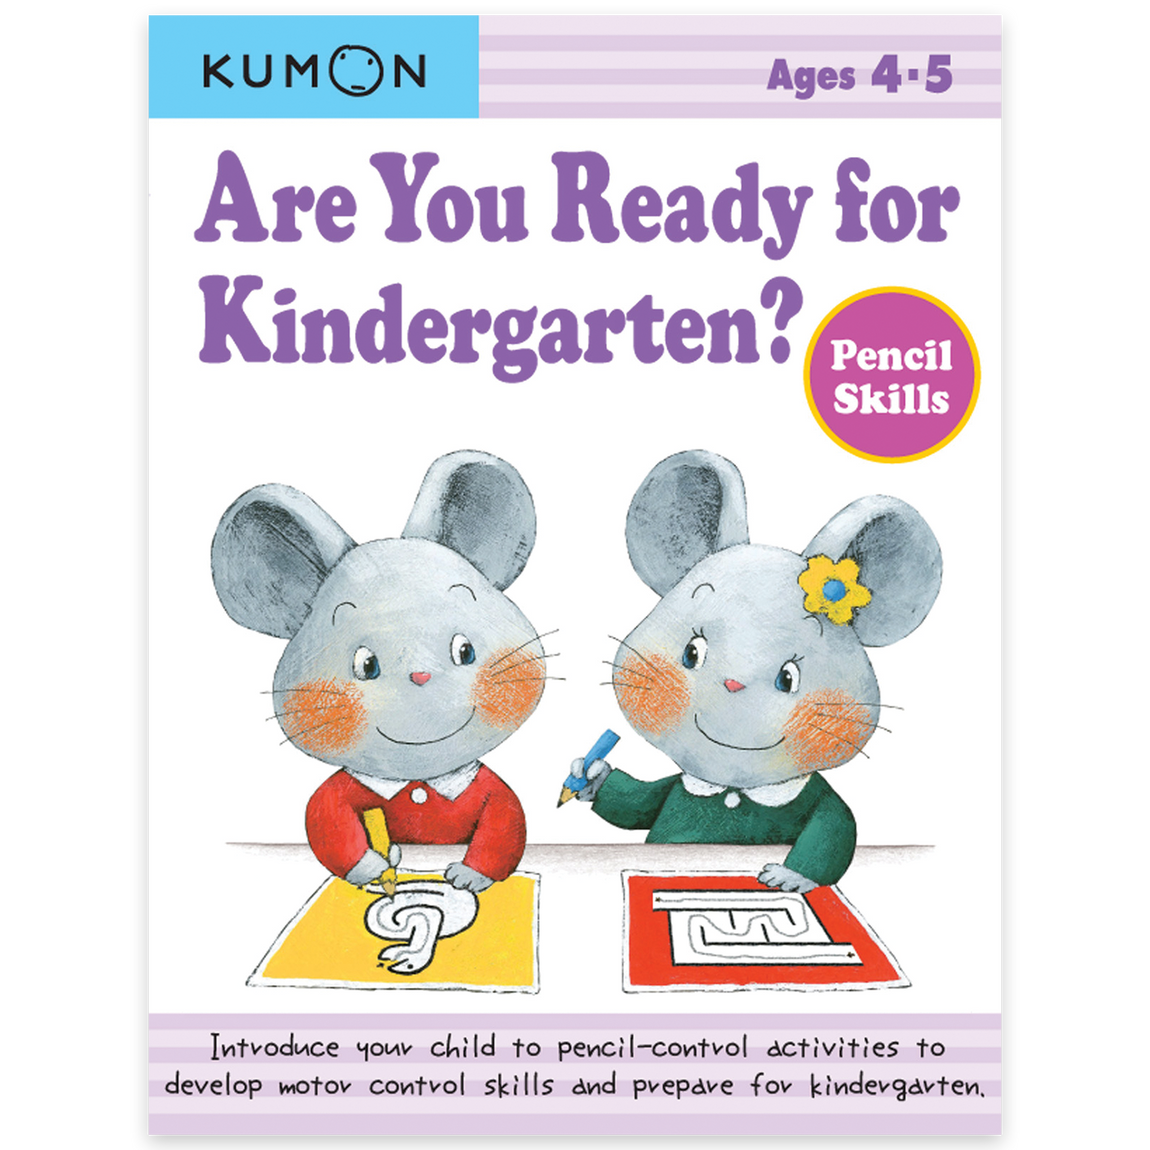 are you ready for kindergarten? pencil skills